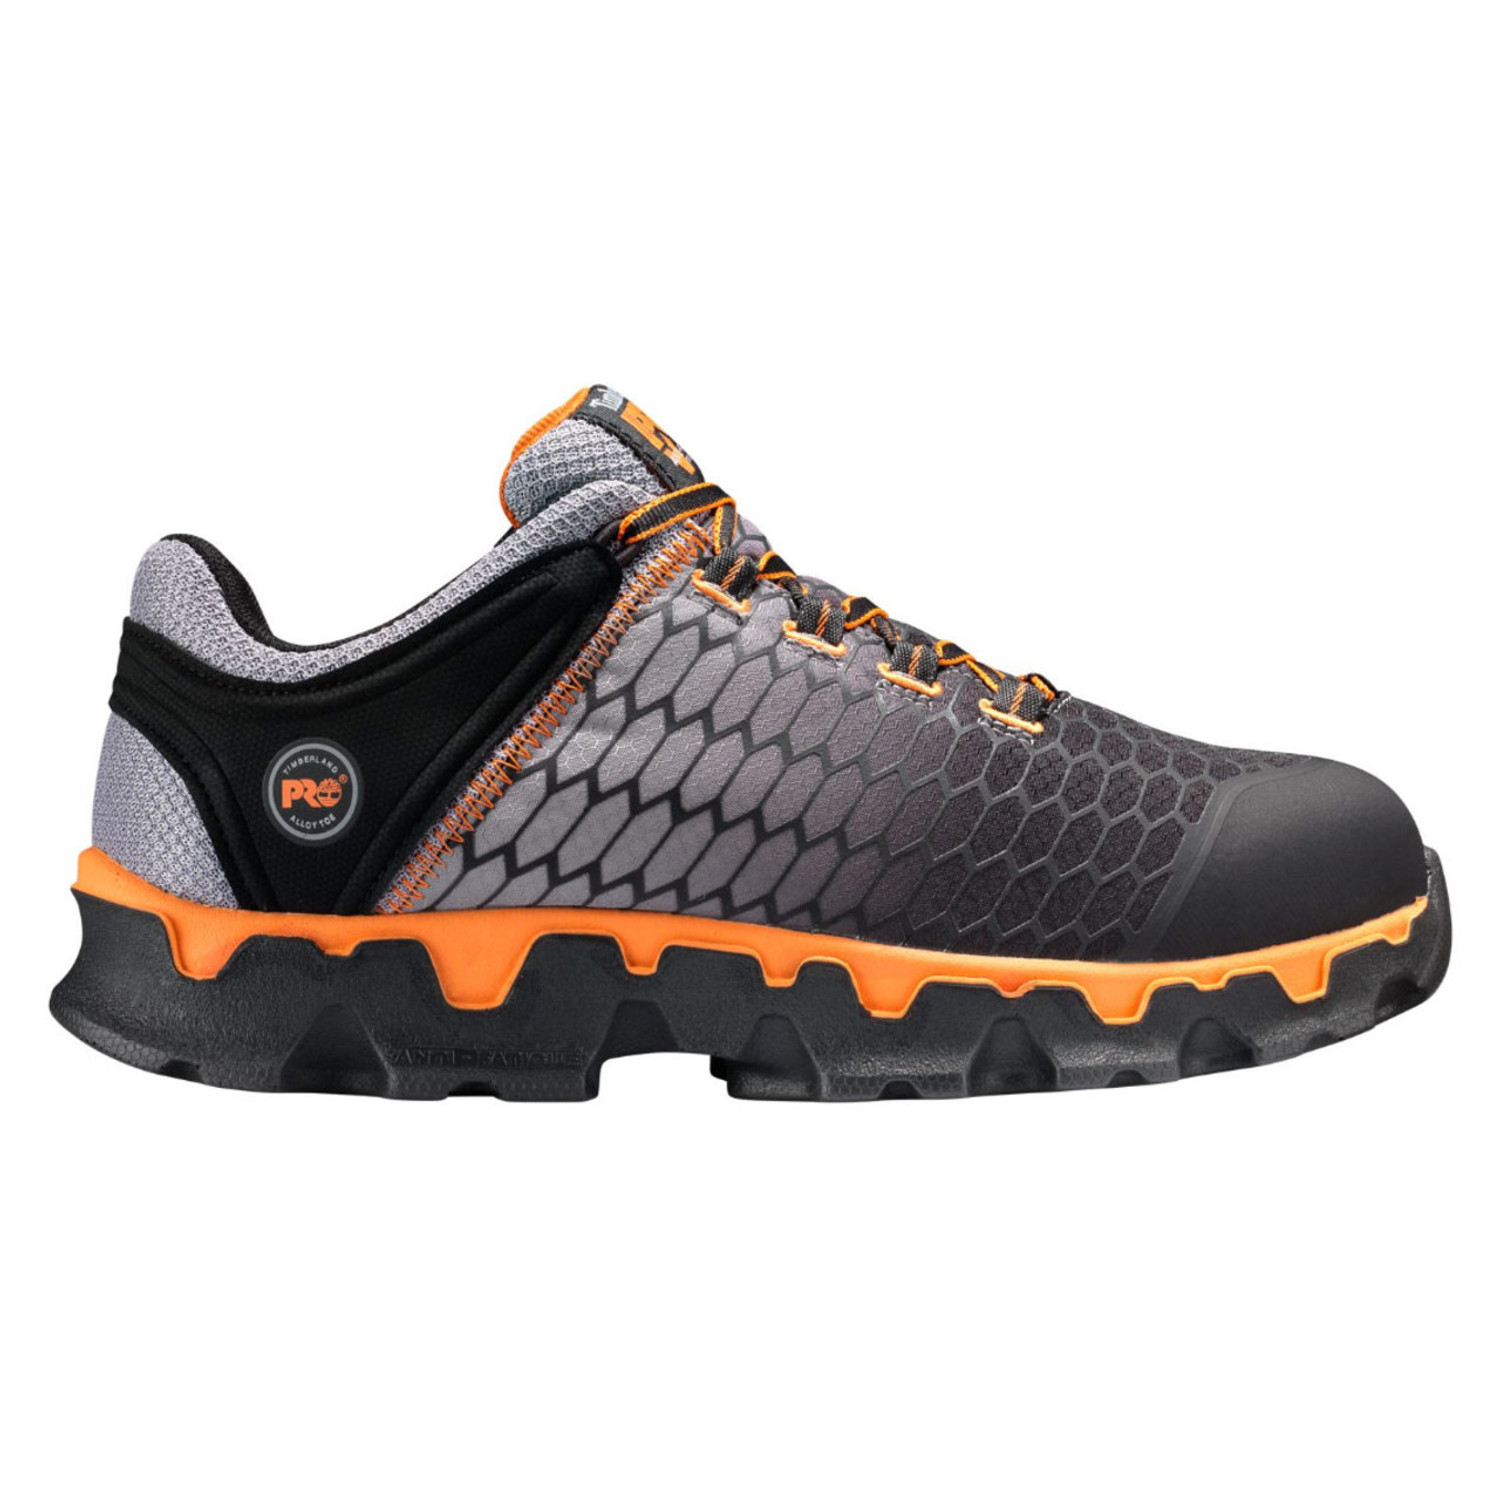 Timberland PRO Men's Powertrain Sport SD+ Alloy Toe Athletic Shoes